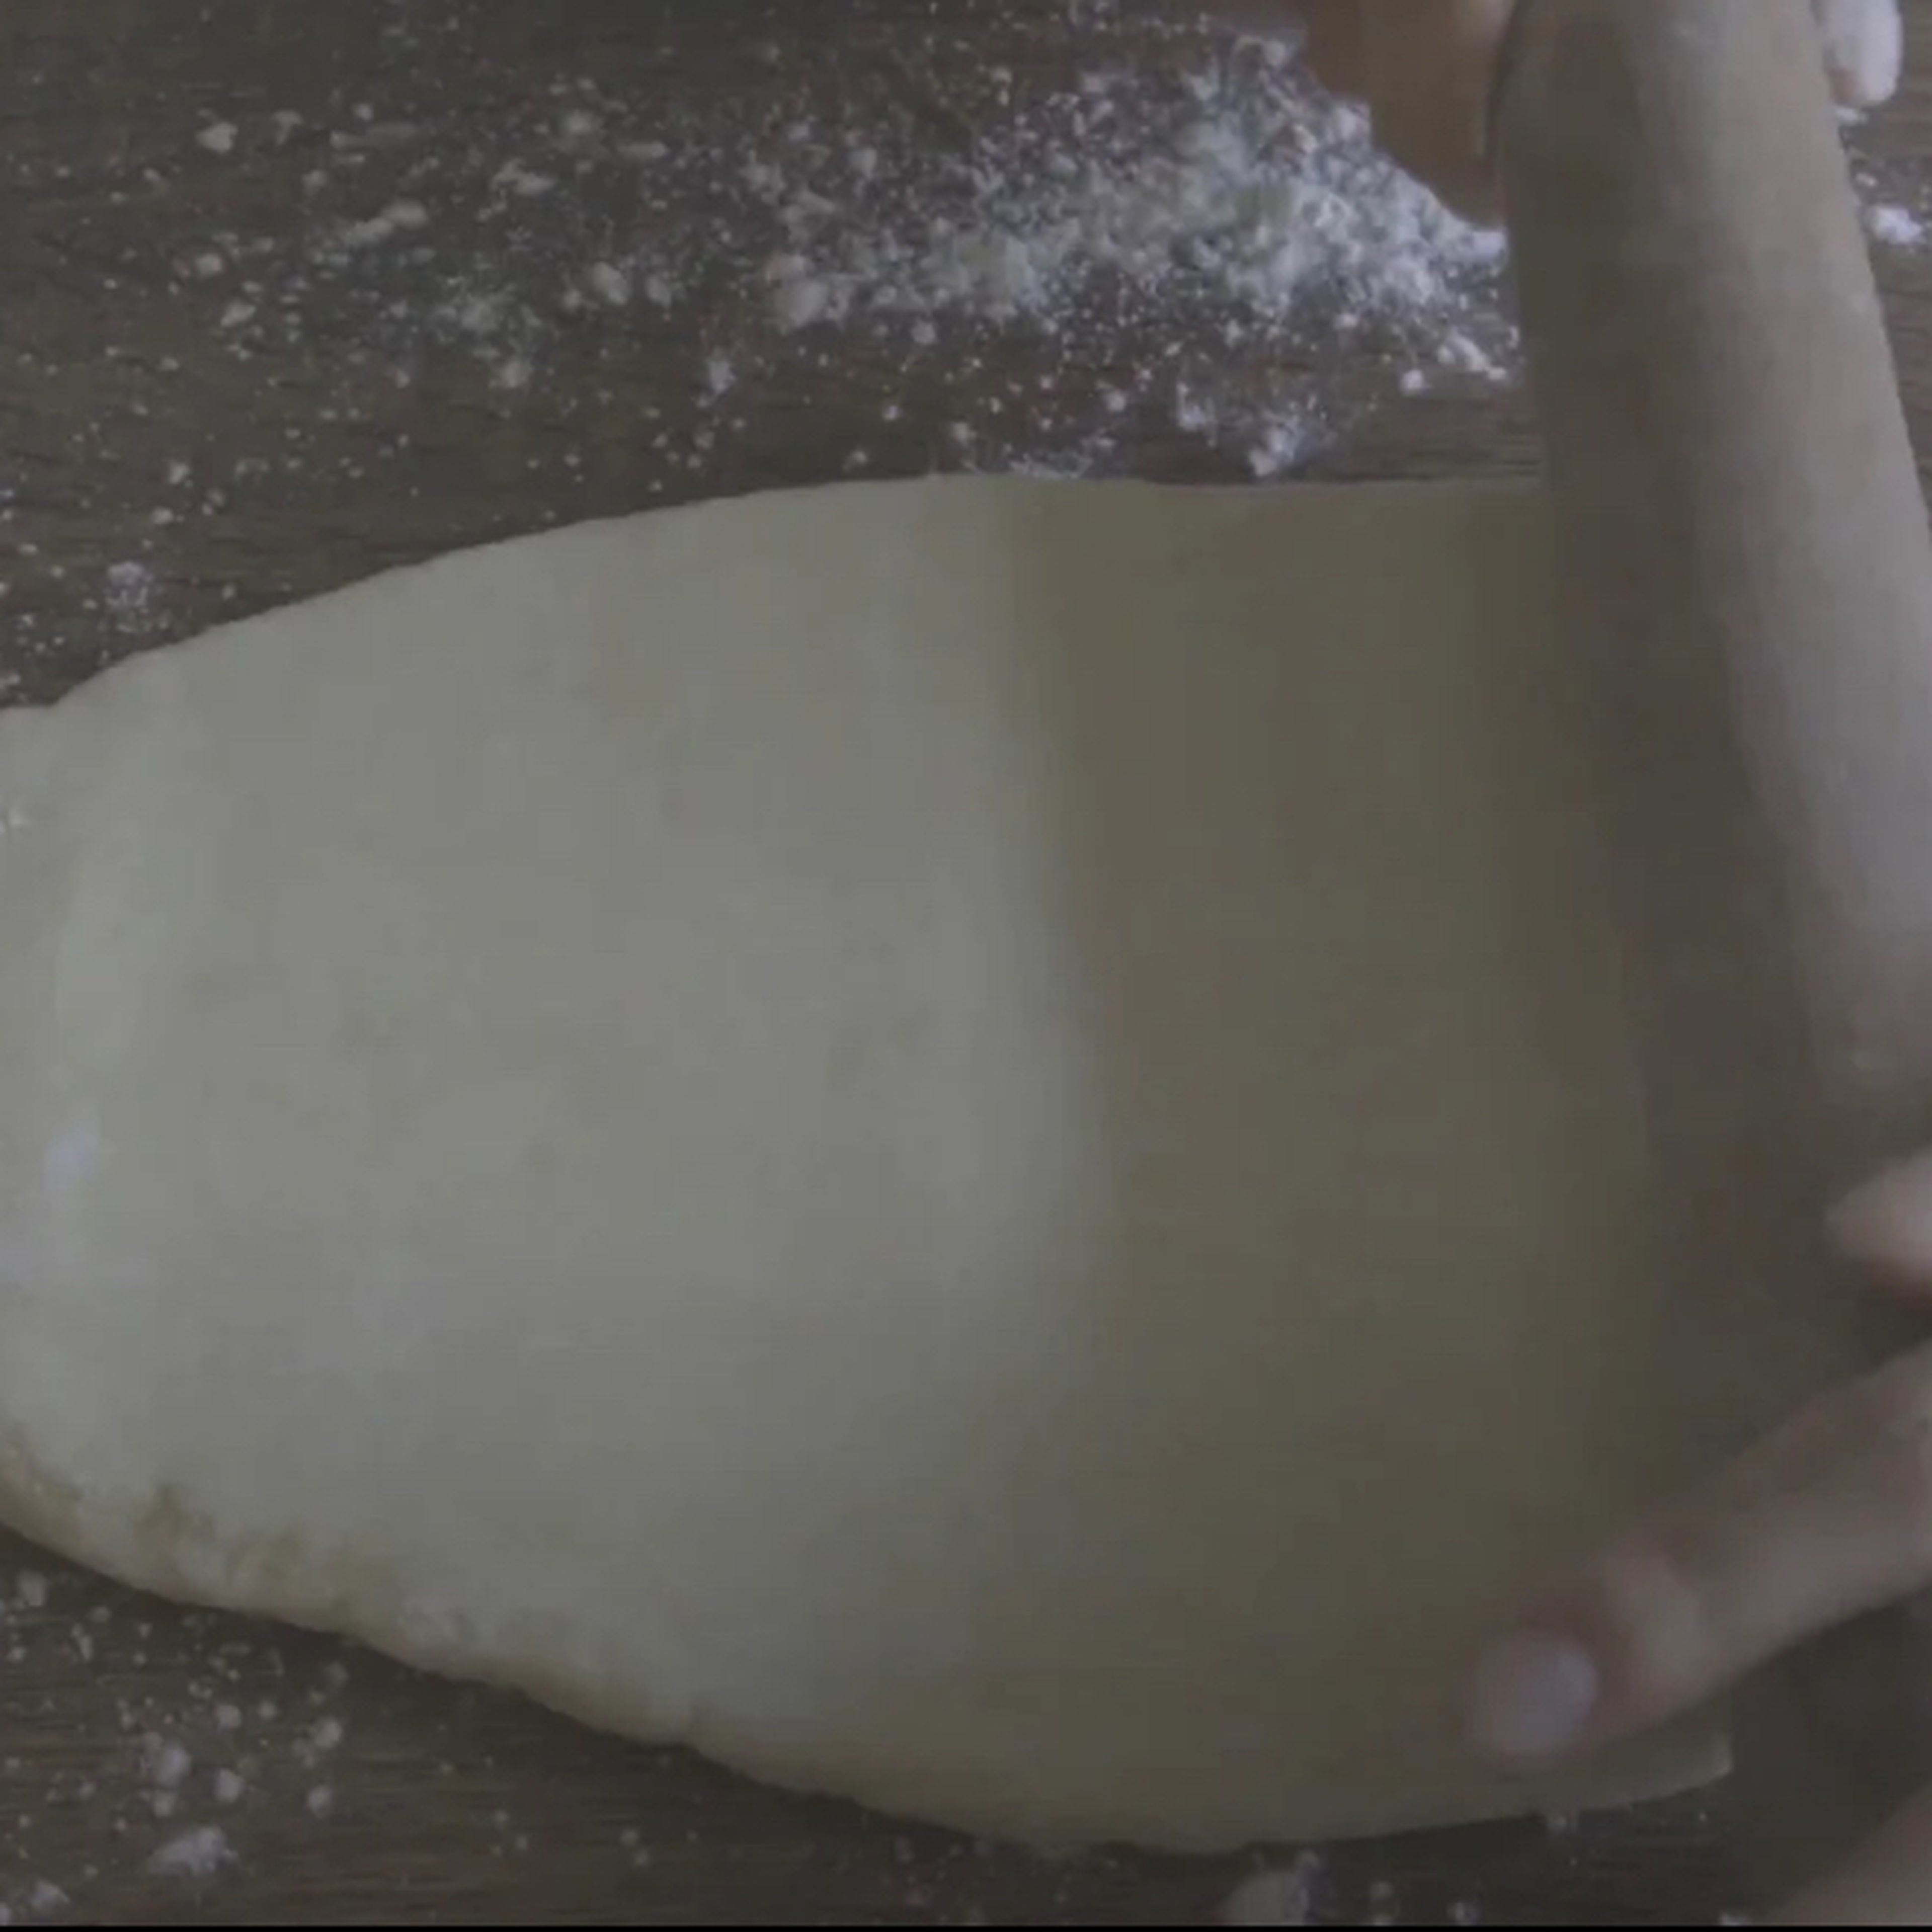 Roll out the dough to 0.6 in. thick.